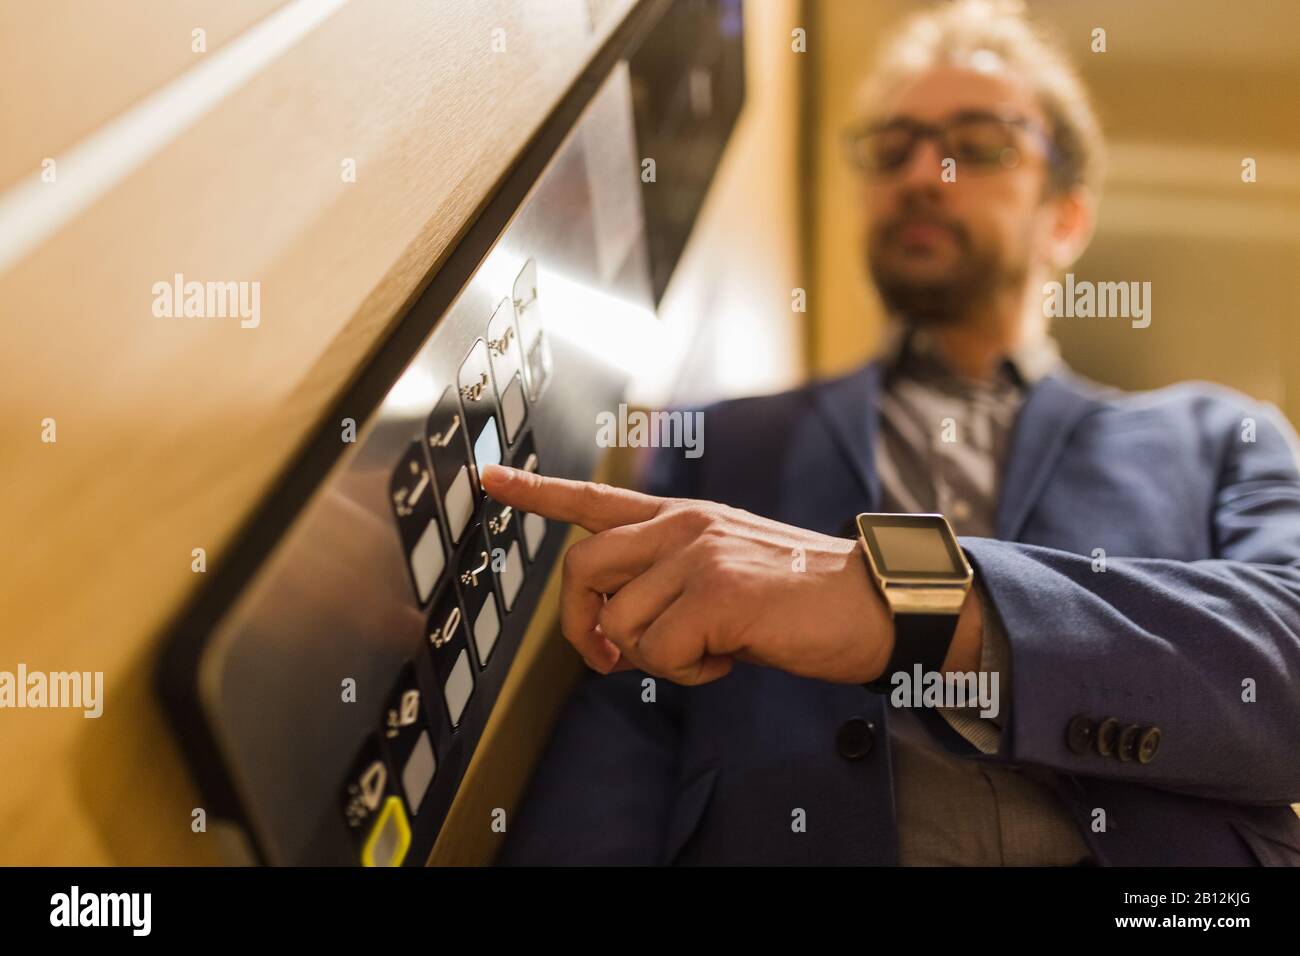 Man pressing modern elevator button with his forefinger. Stock Photo